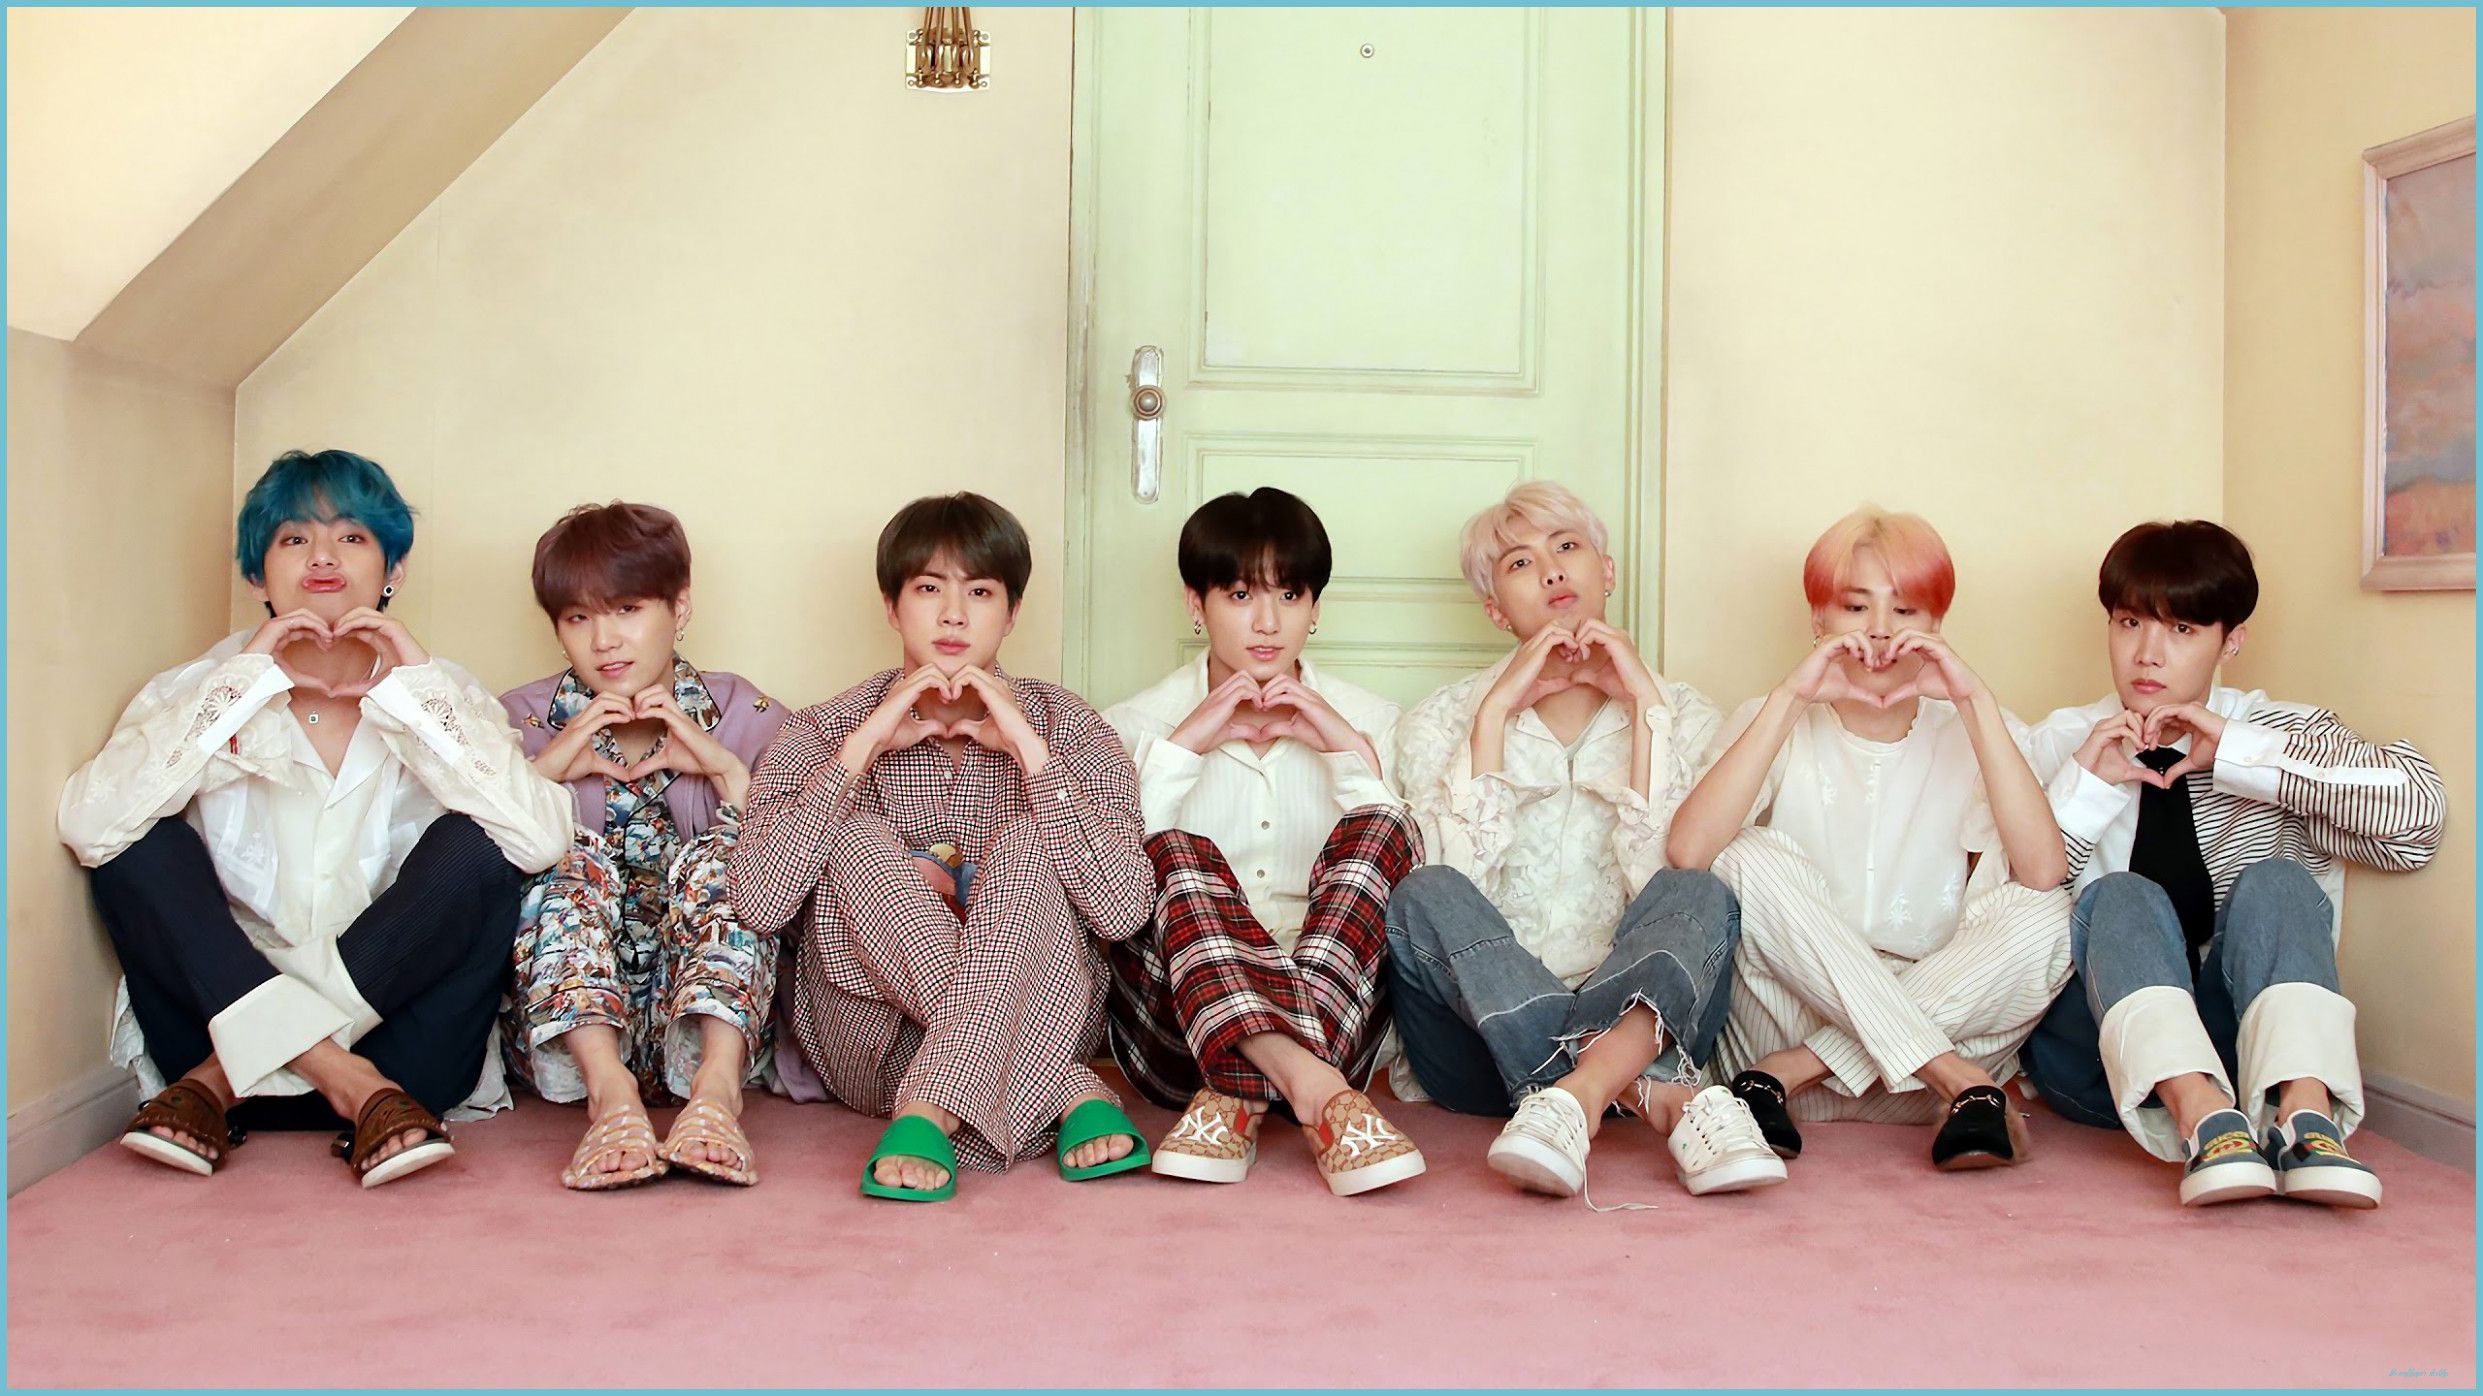 Important Facts That You Should Know About Bts Wallpaper Desktop. Bts Wallpaper Desktop